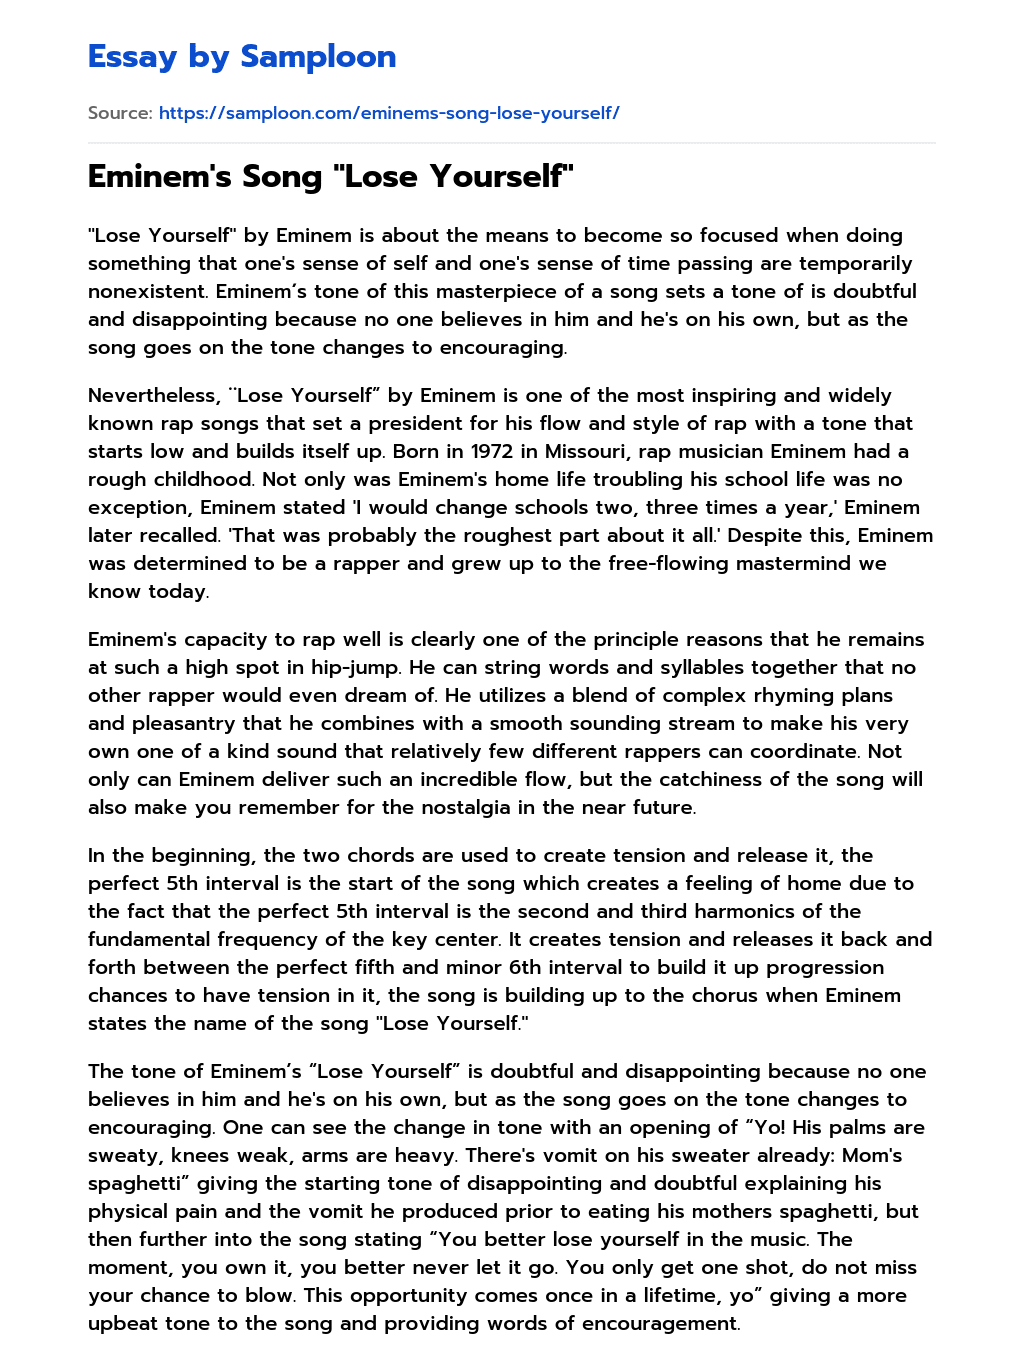 Eminem’s Song “Lose Yourself” Analytical Essay essay